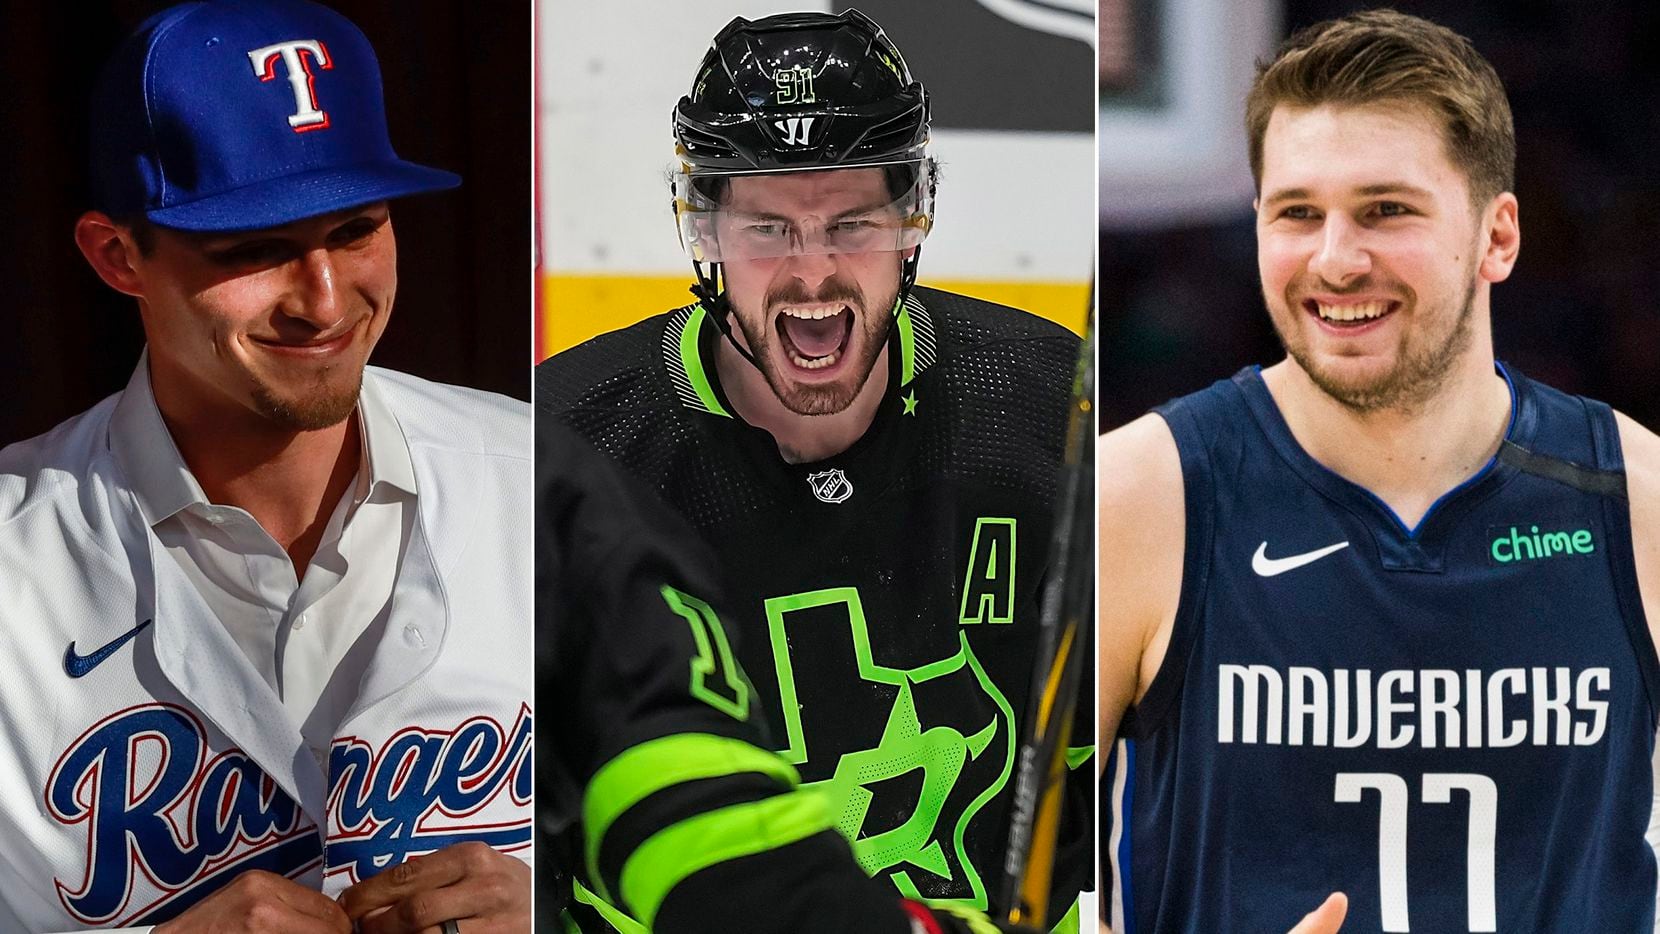 Staff photos (from L to R): Rangers infielder Corey Seager, Stars forward Tyler Seguin,...